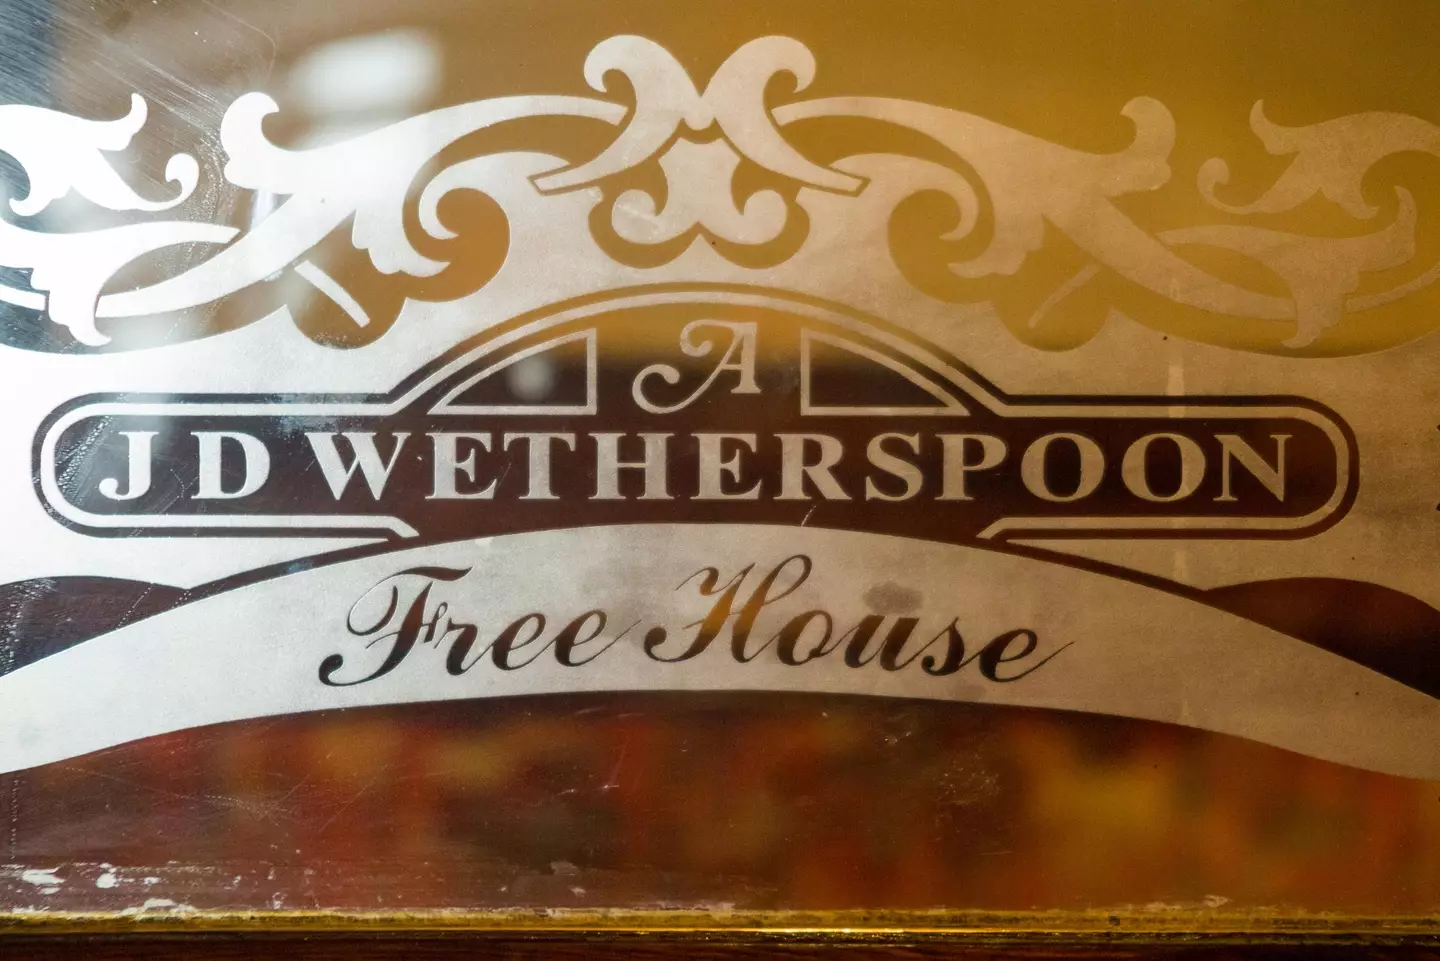 Wetherspoon is making some changes to its menu.